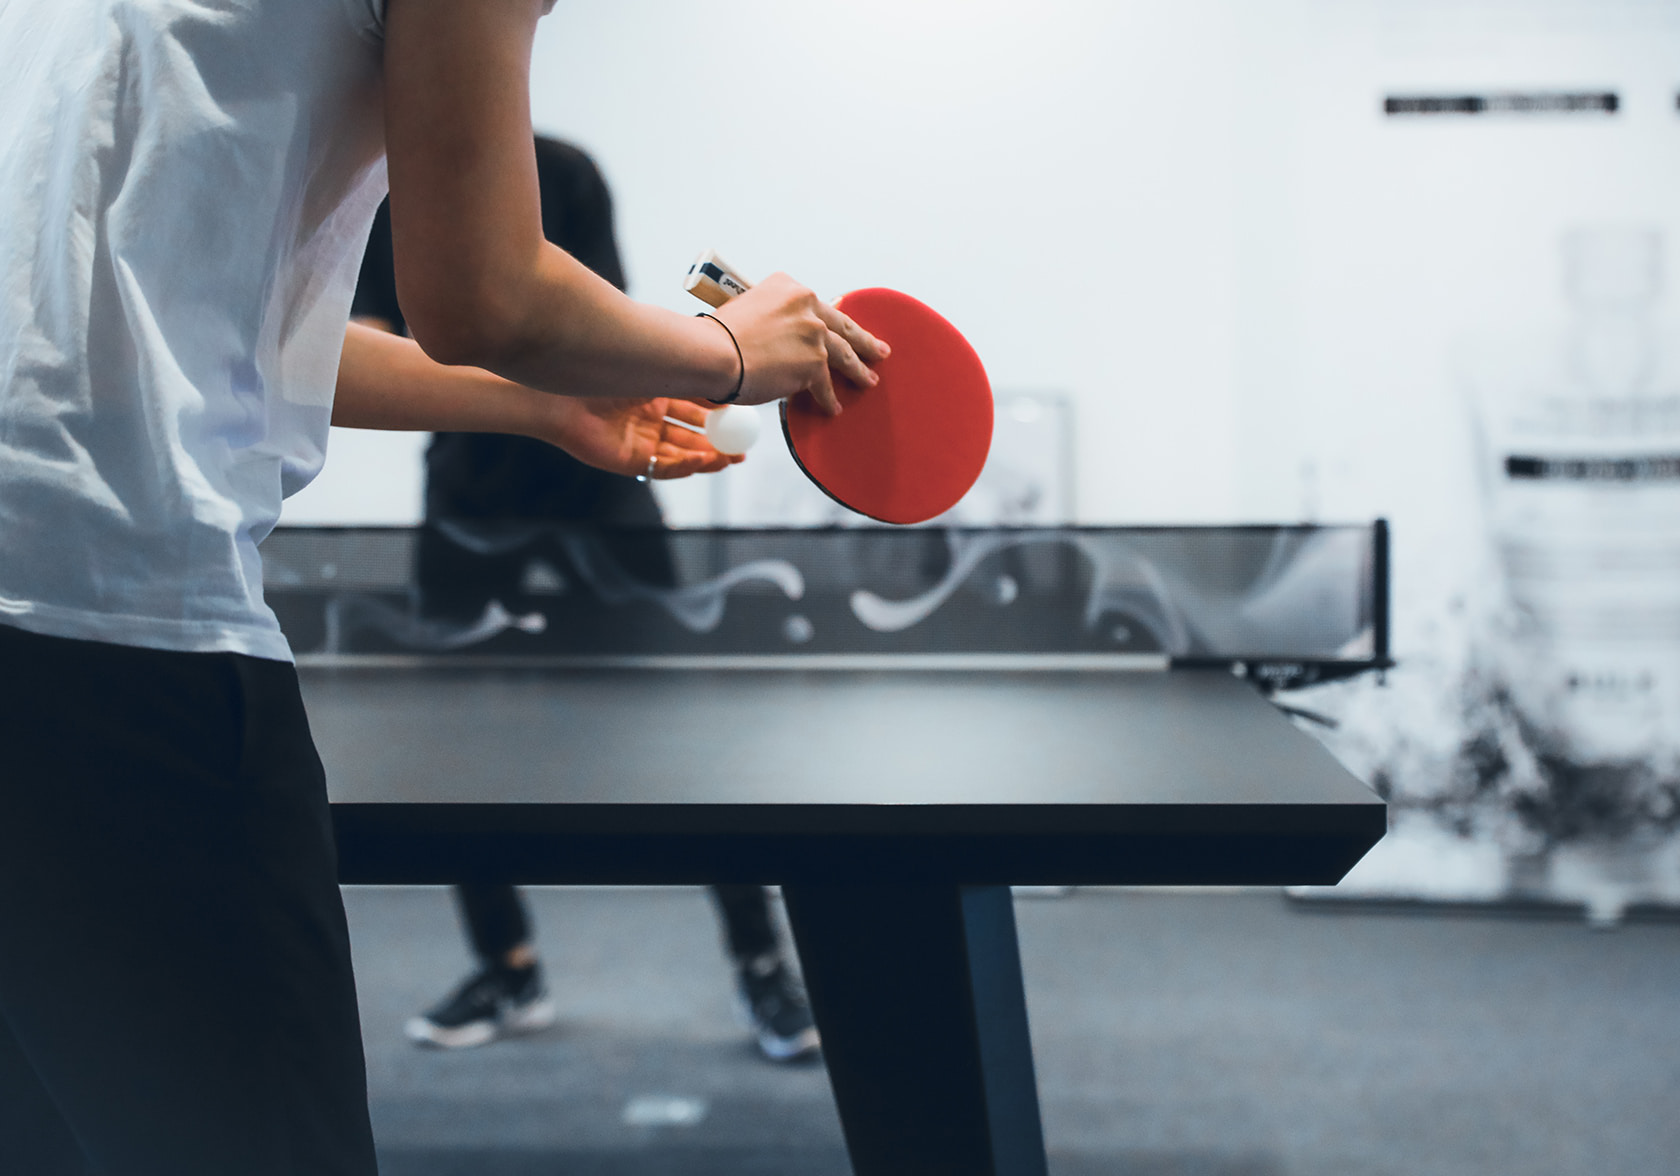 "Table tennis in the office" is the new standard.